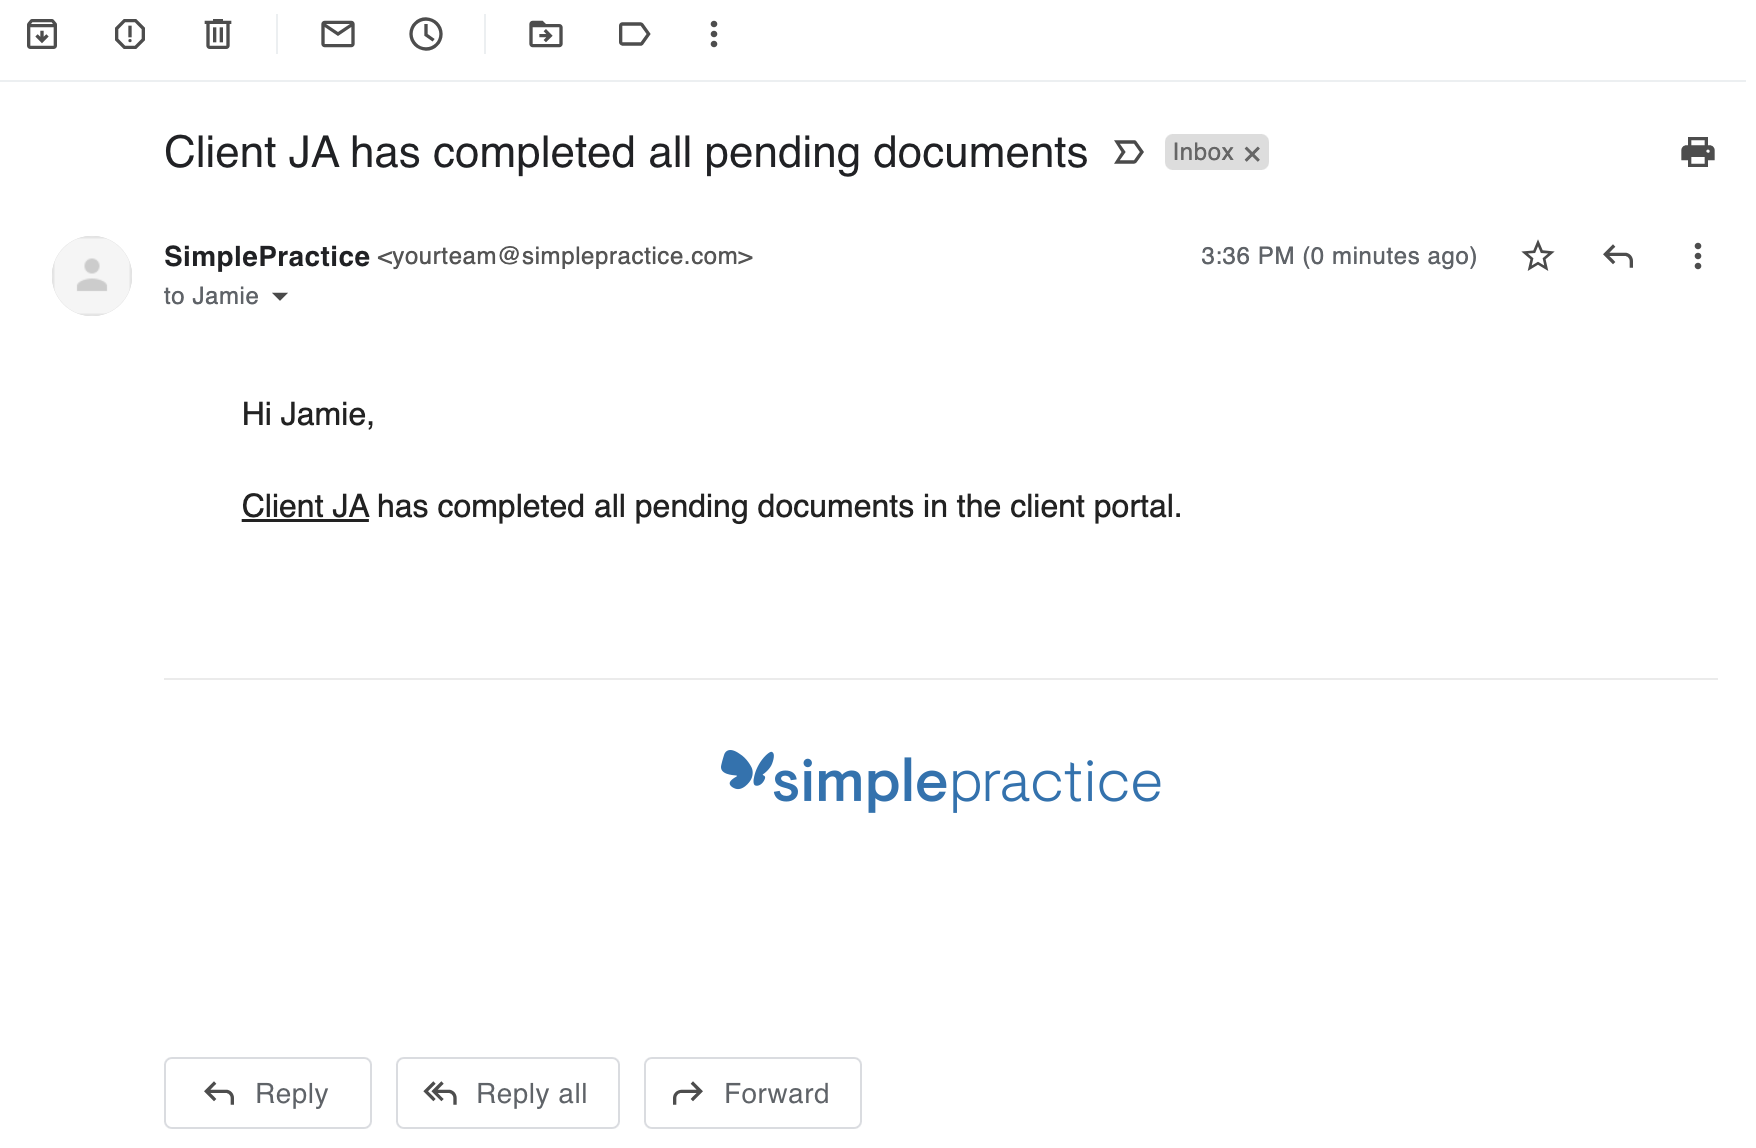 completeddocuments.simplepractice.email.png